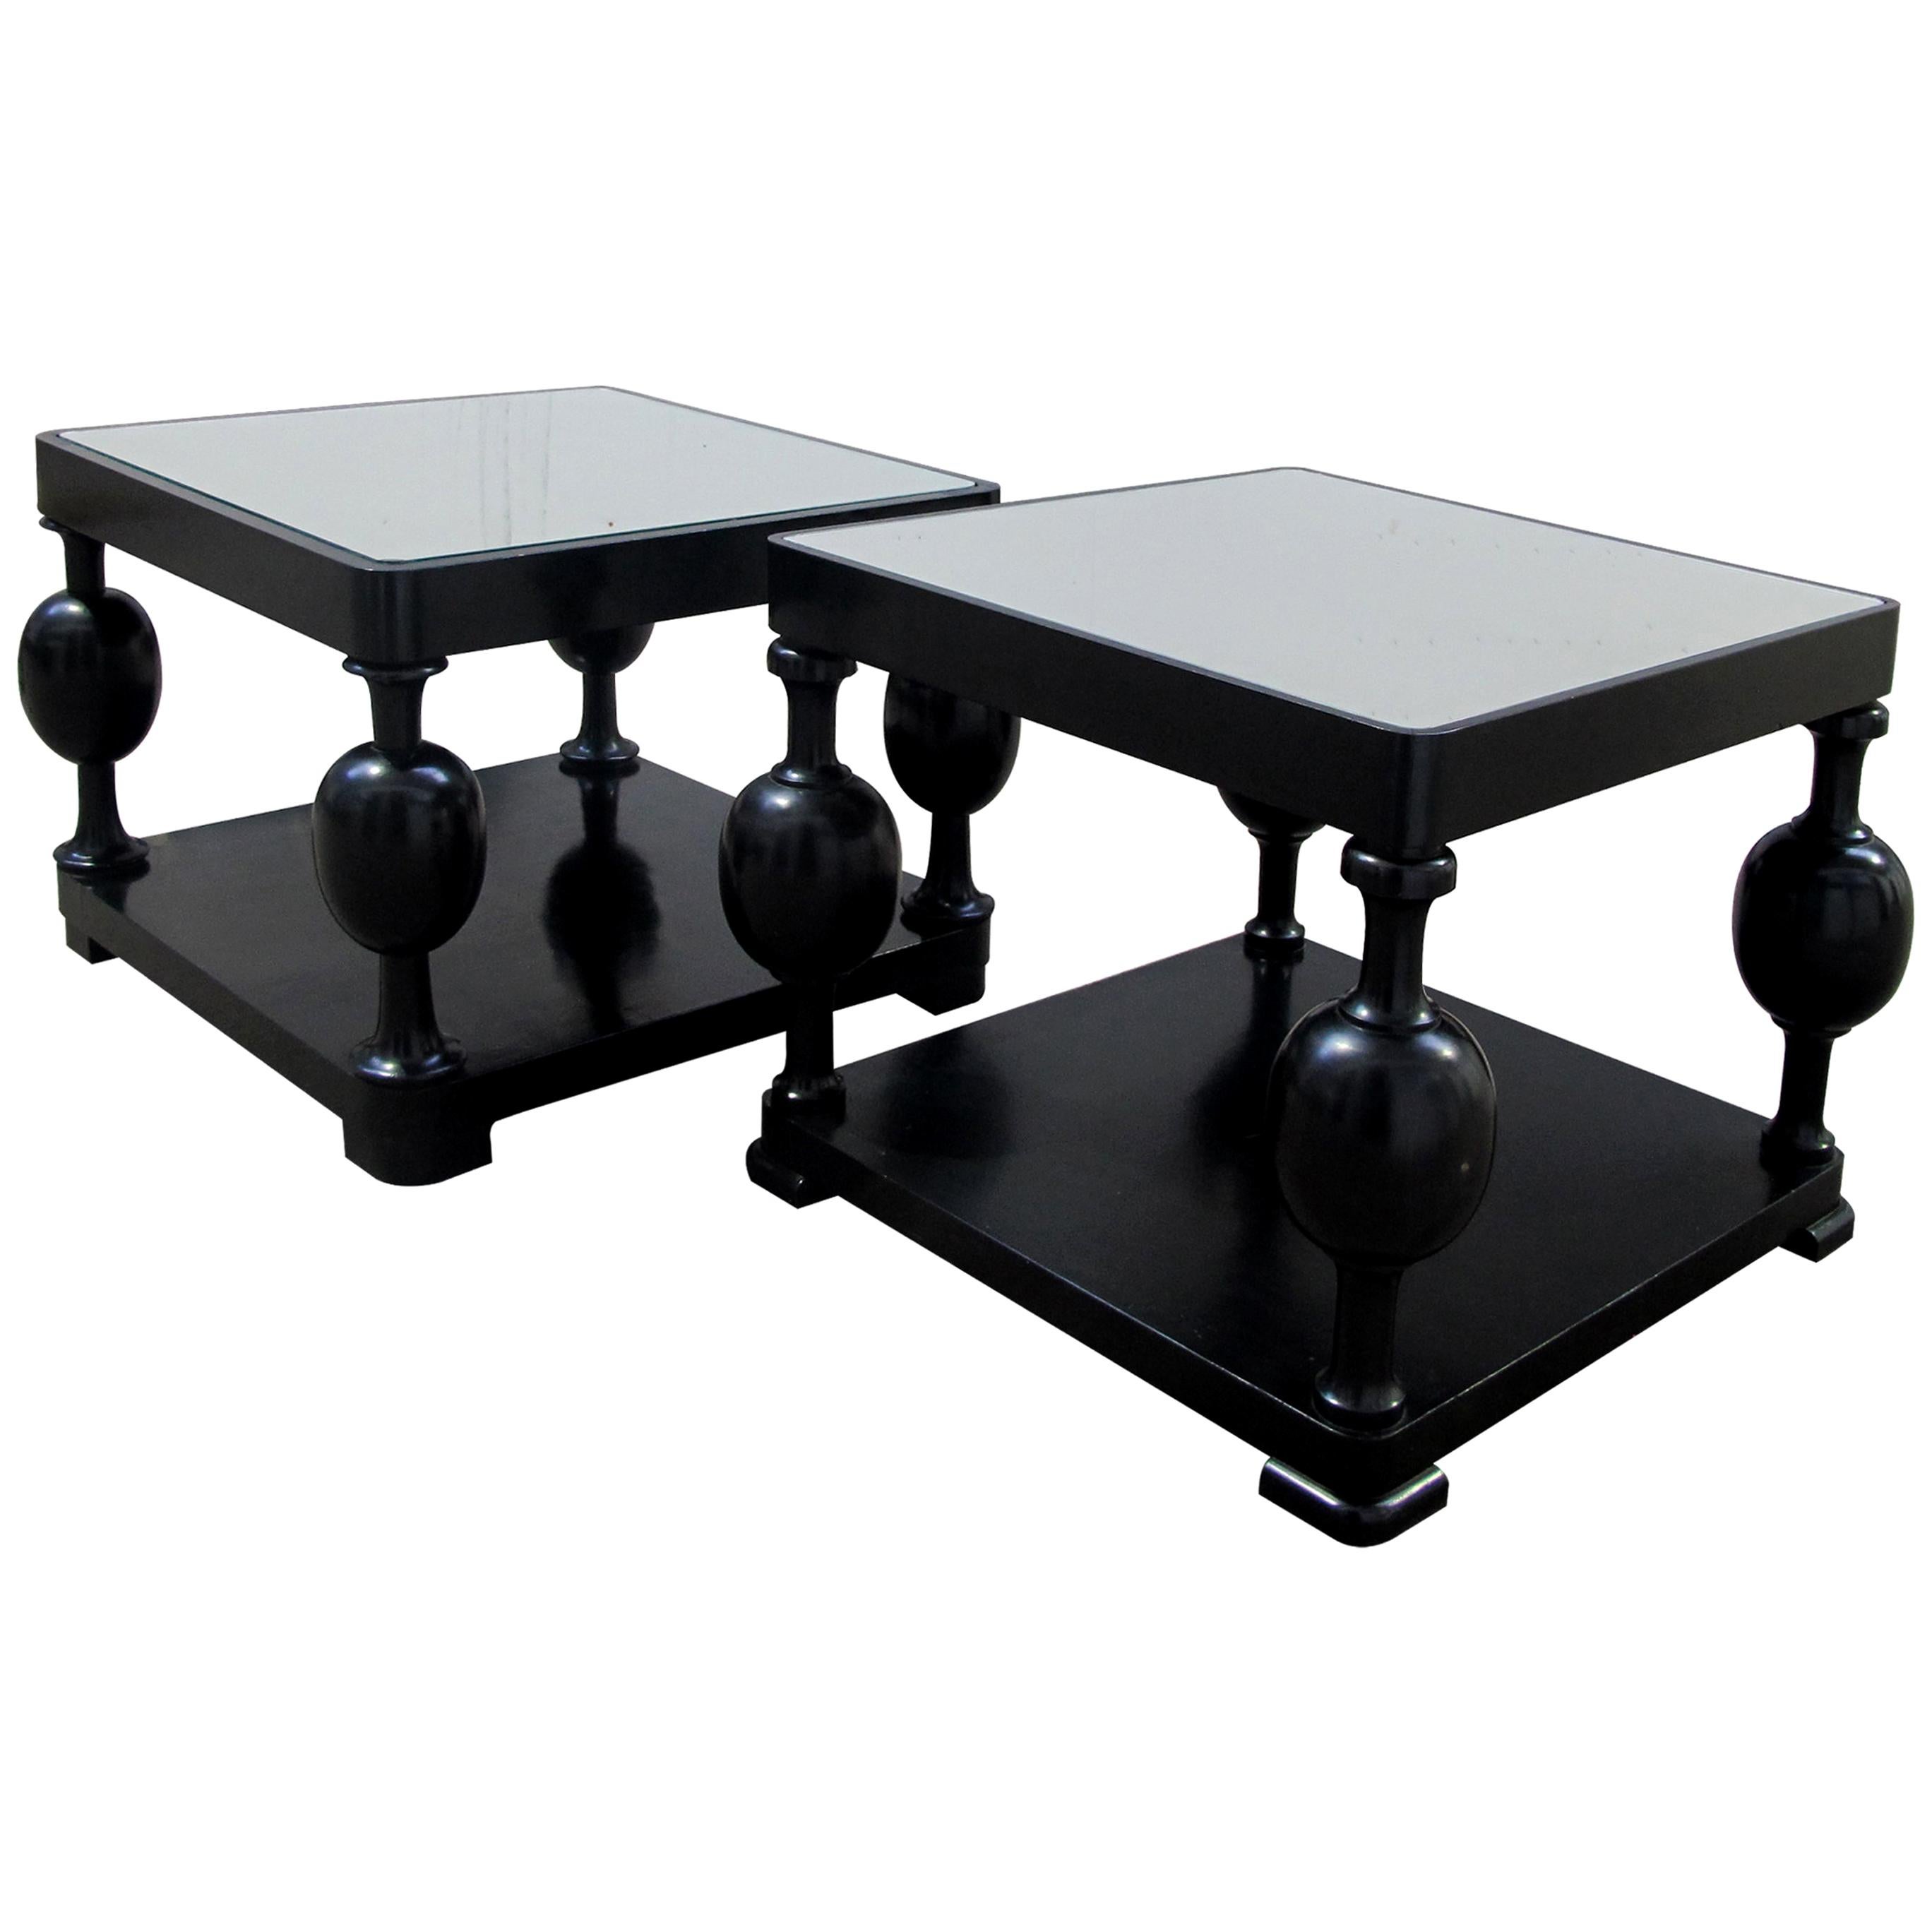 Art Deco Swedish Set of Two Side Tables with Mirrored Tops & Ebonized Birch Wood